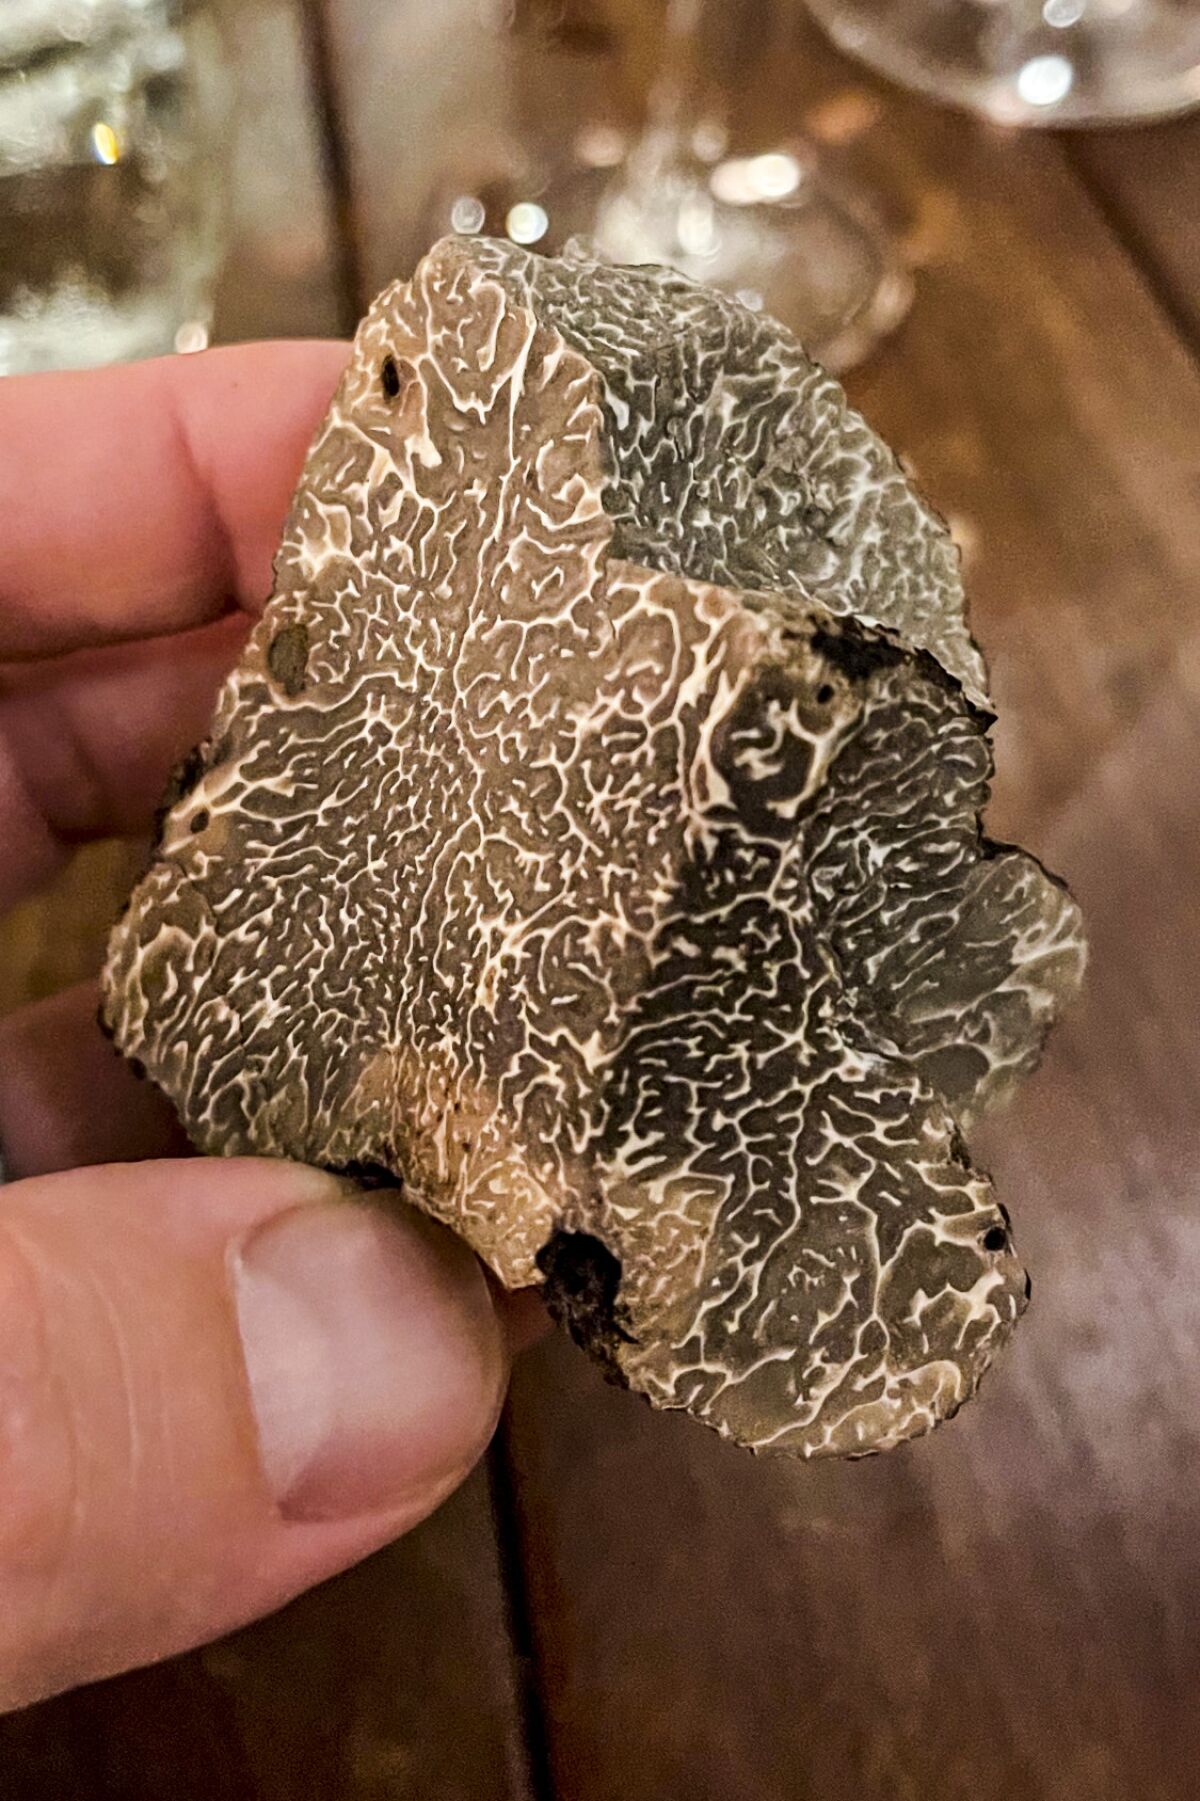 A hand holds a piece of black truffle.